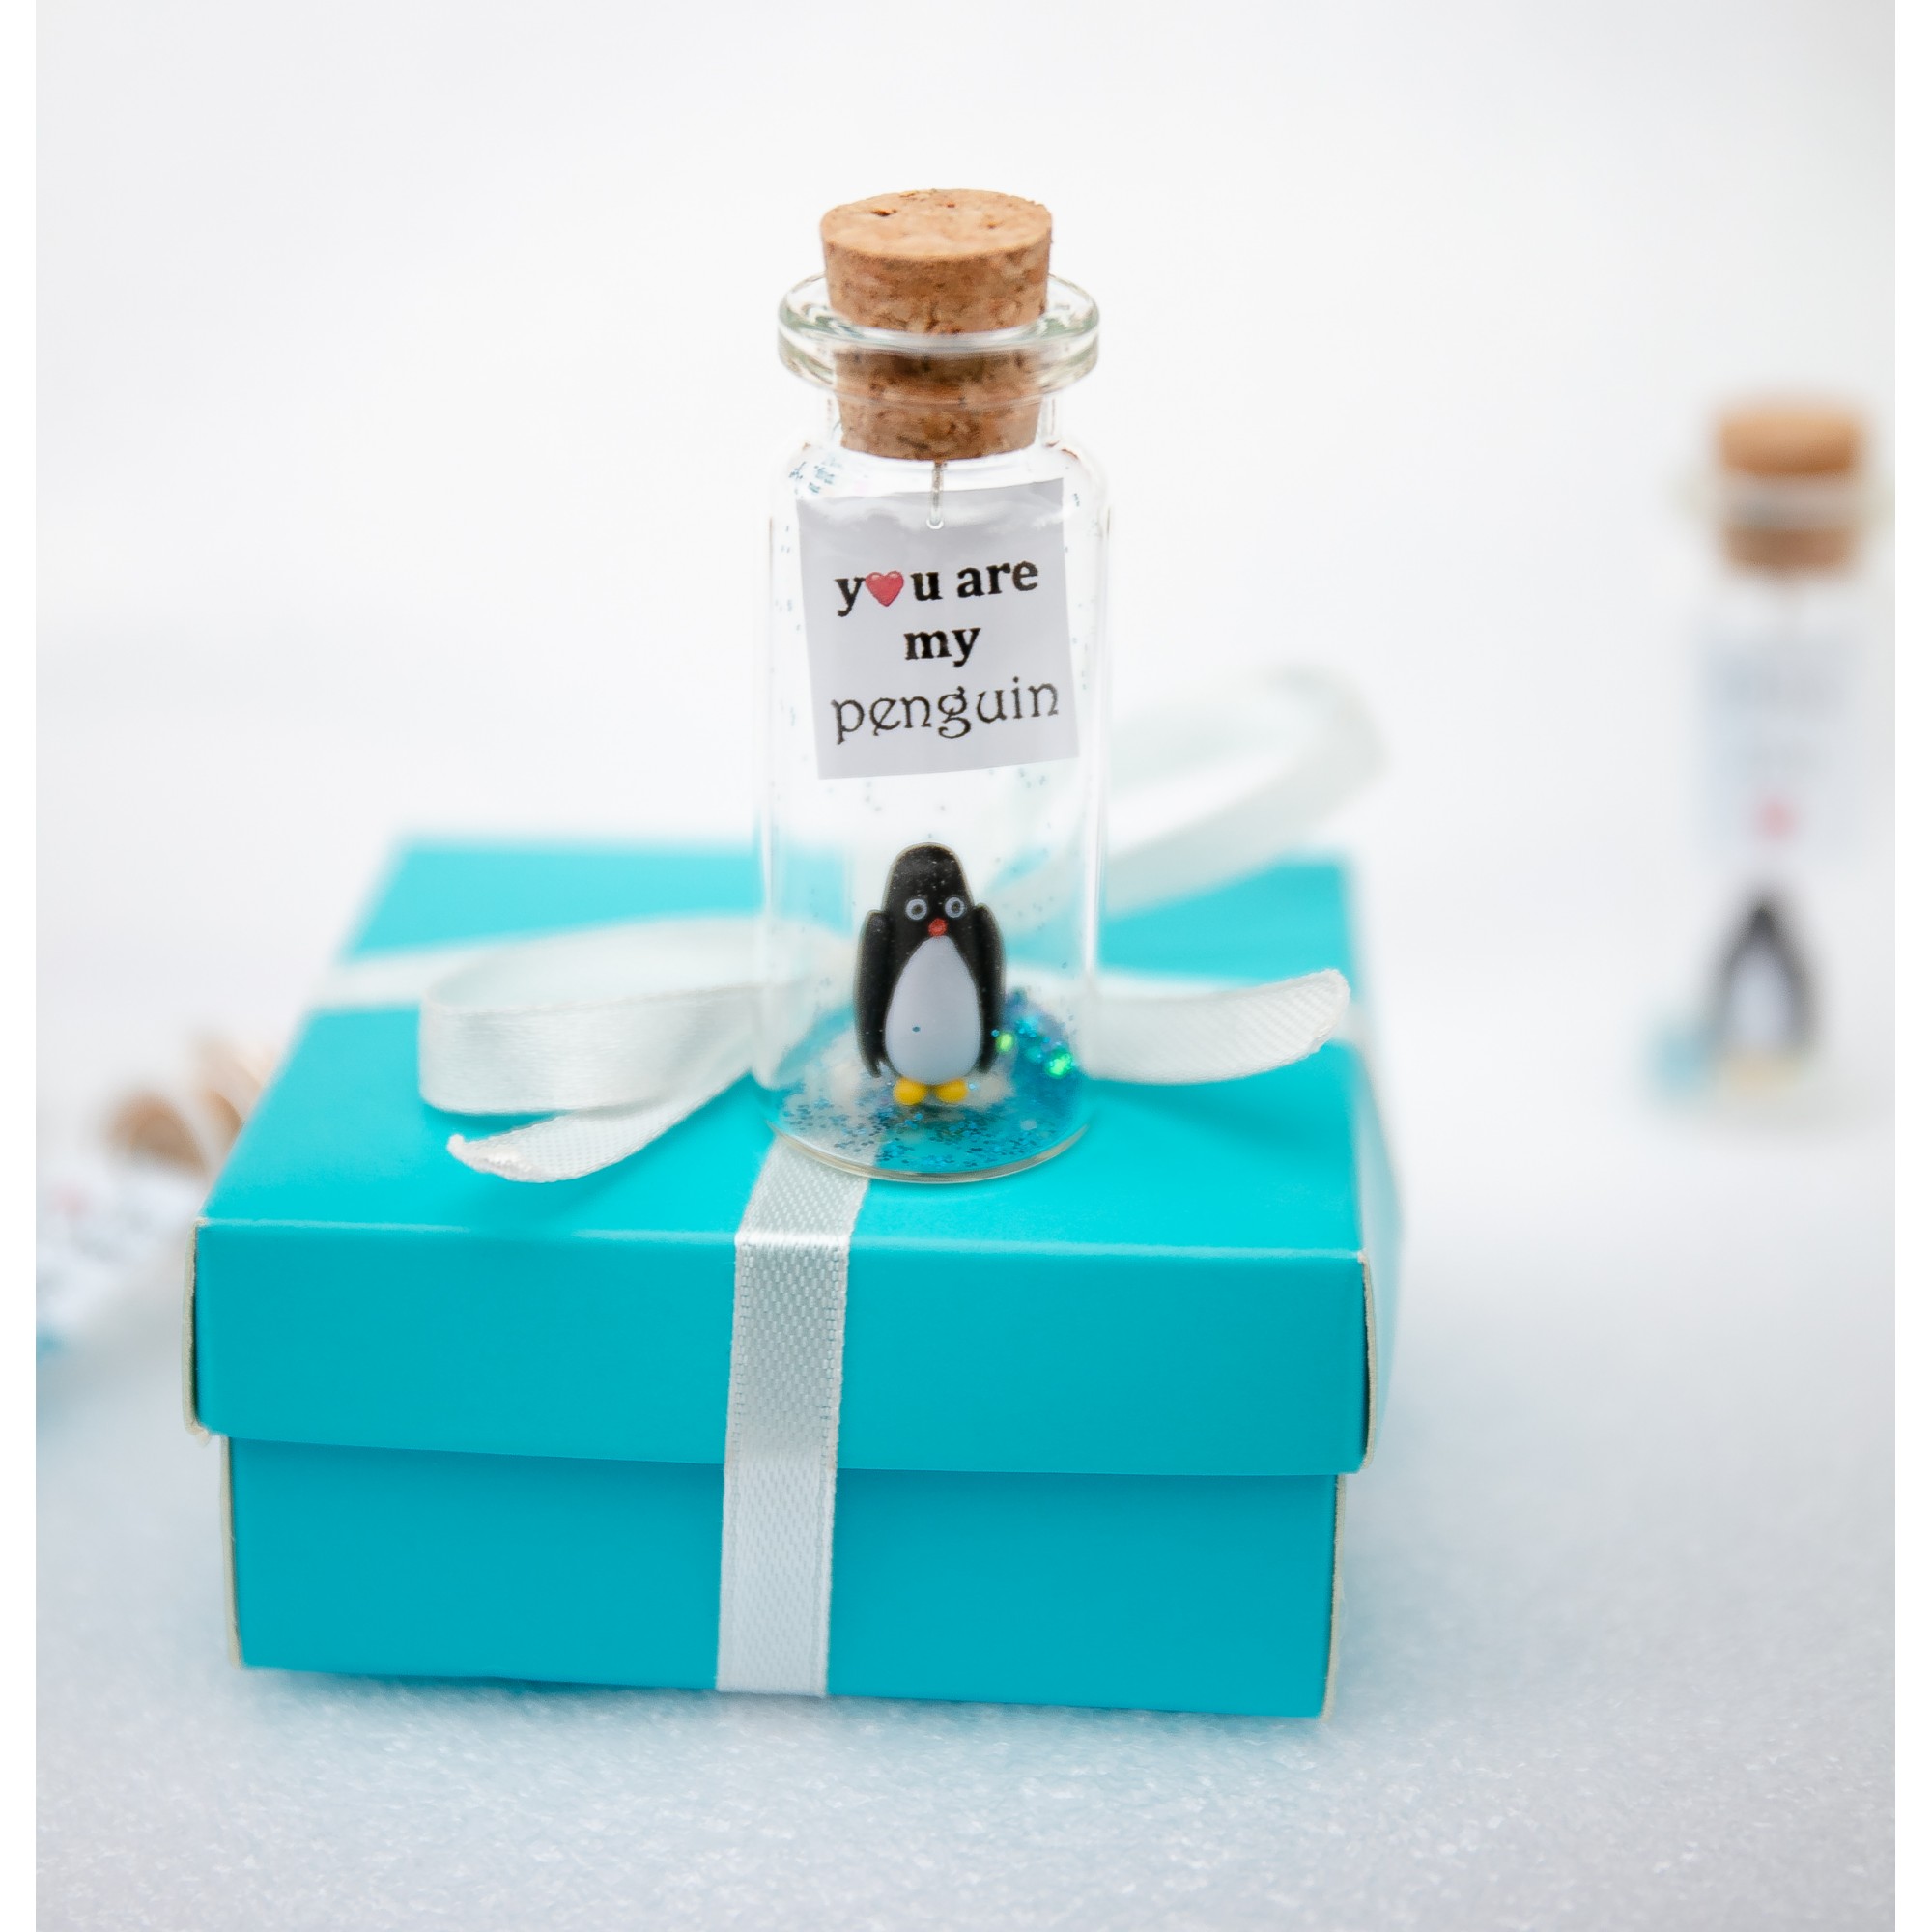 Personalized Penguin 9th Wedding Anniversary Gift for Husband